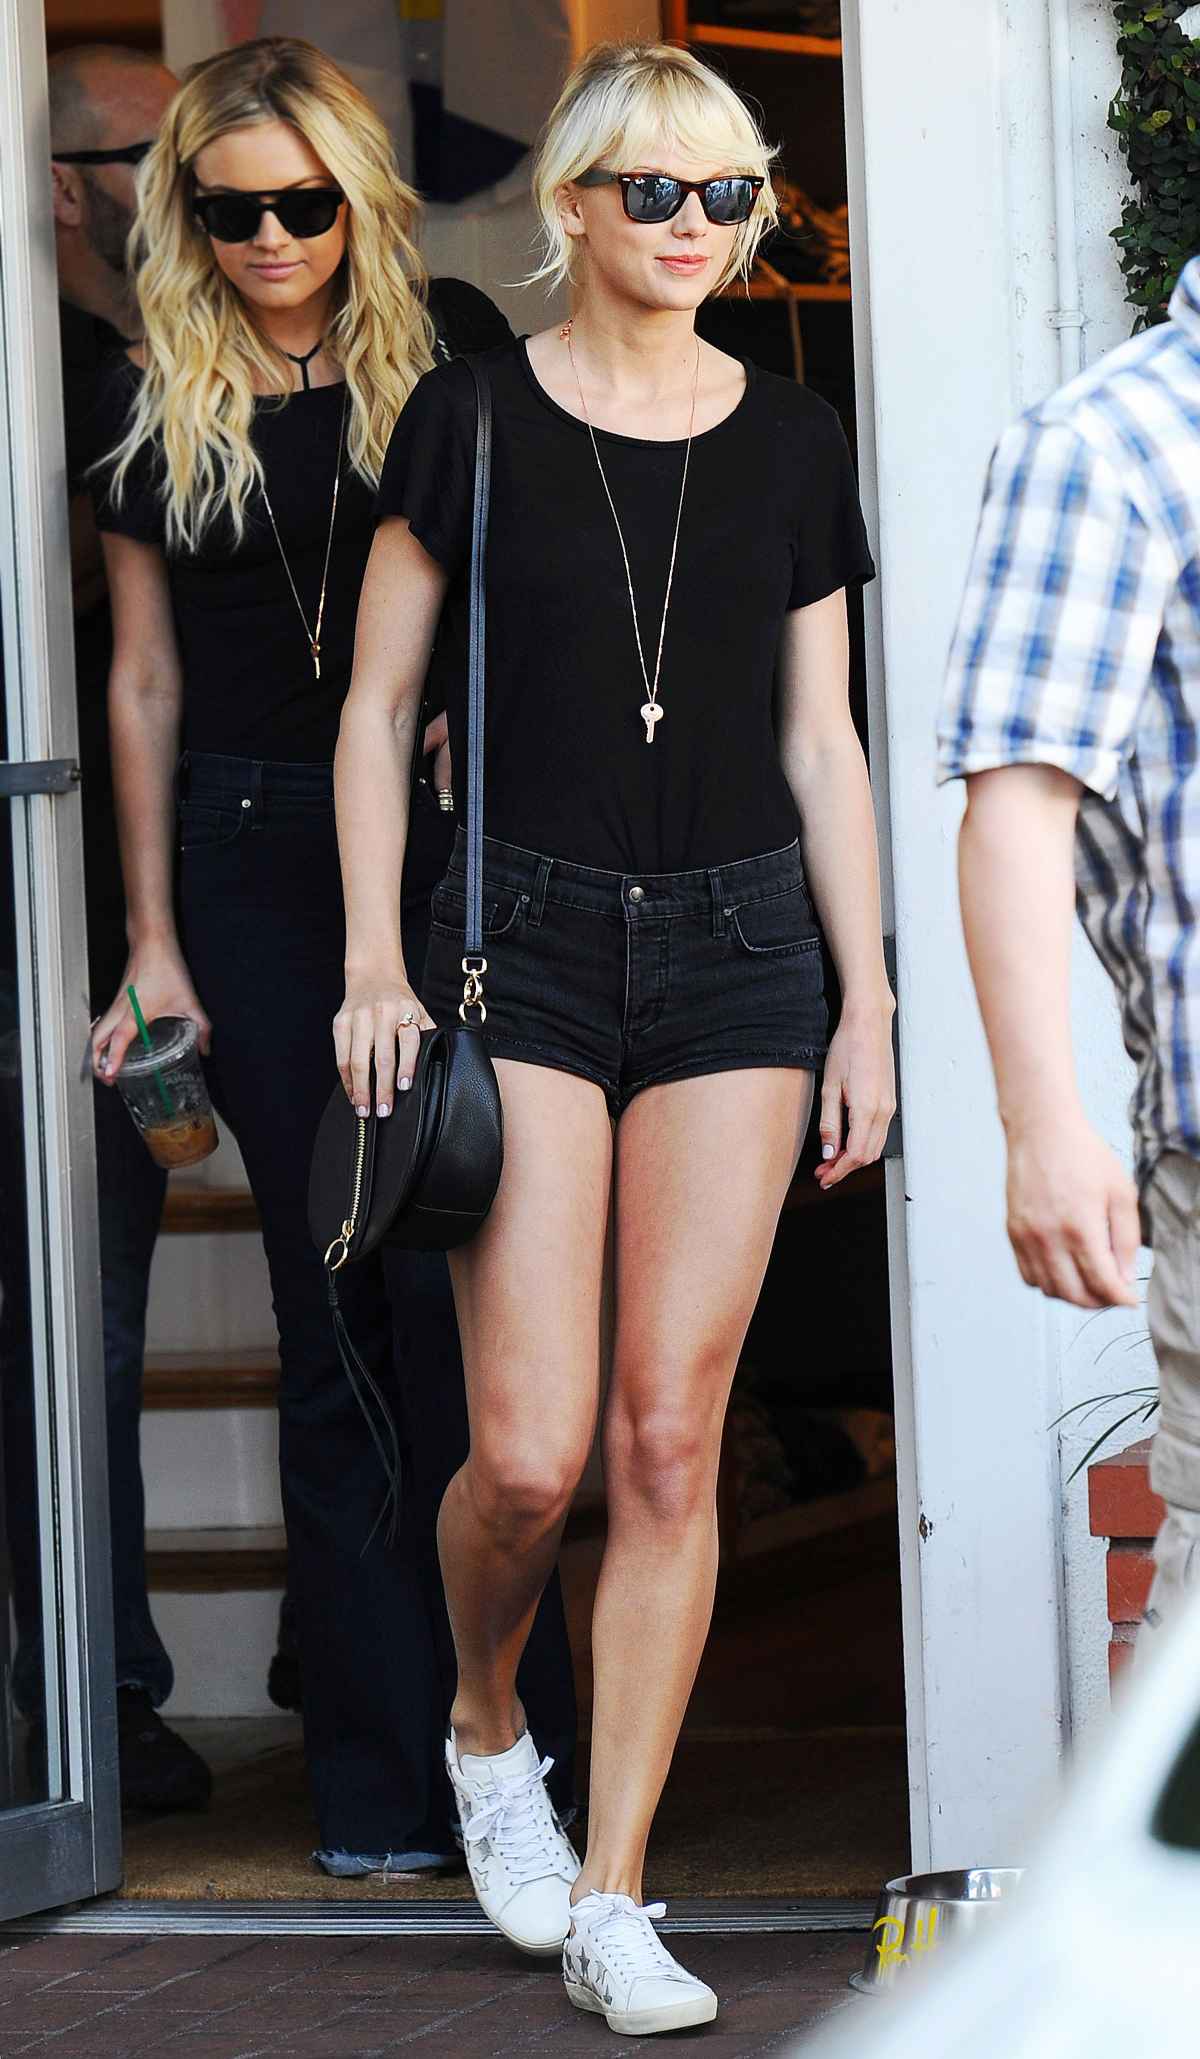 Taylor Swift Wore $59 Urban Outfitters Shorts With $650 Gucci